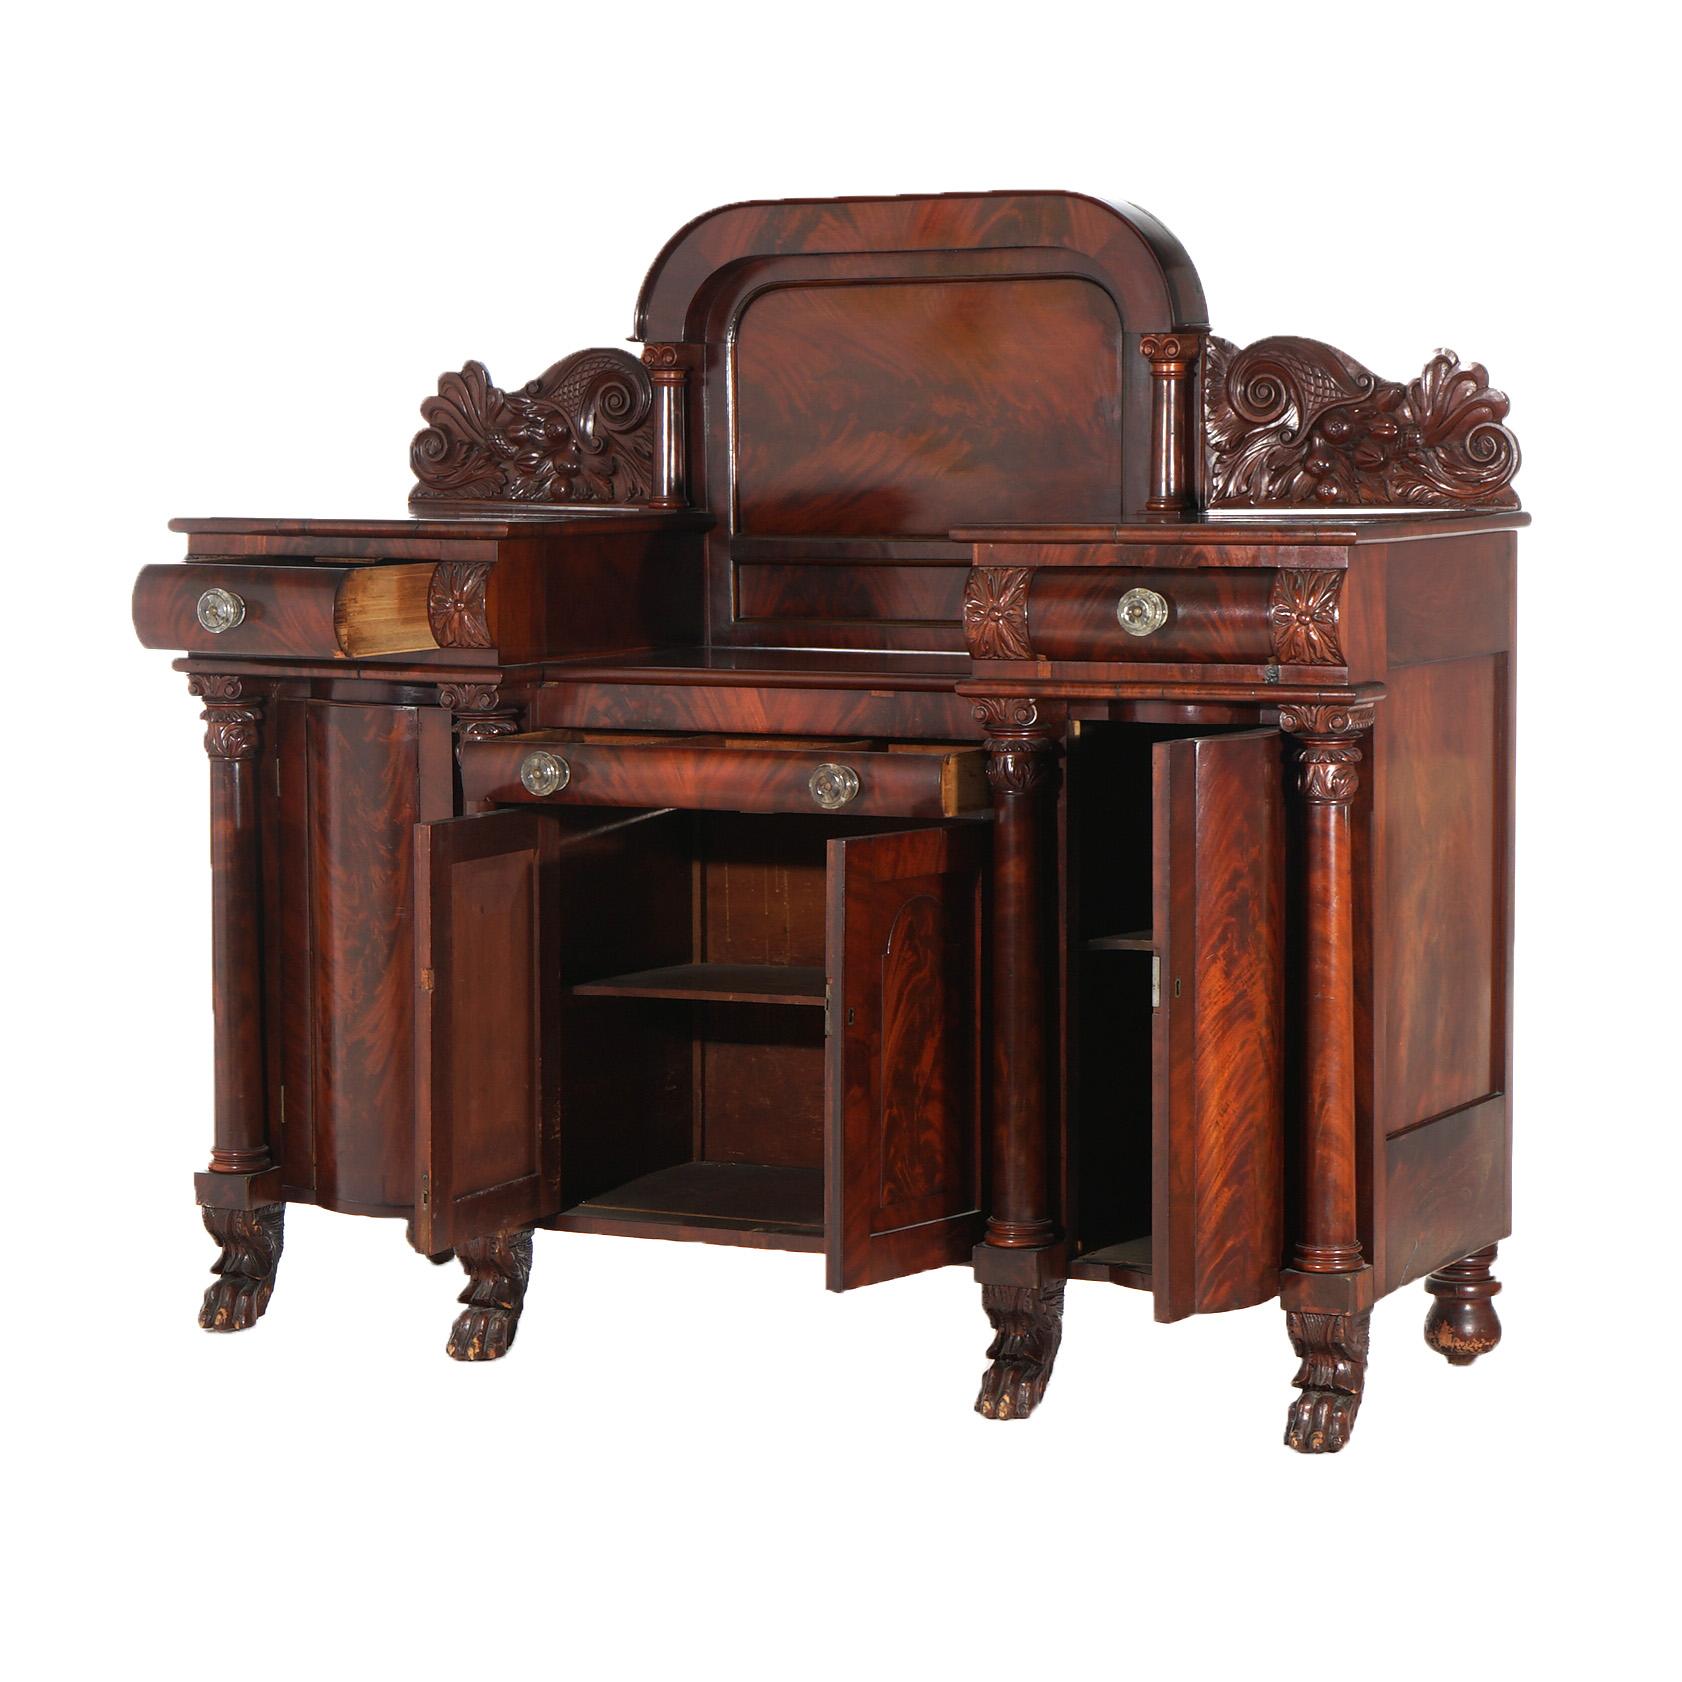 ***Ask About Reduced In-House Delivery Rates - Reliable Professional Service & Fully Insured***
An antique Greco American Empire sideboard attributed to Quervelle offers flame mahogany construction with Neoclassical elements including Greco-Roman